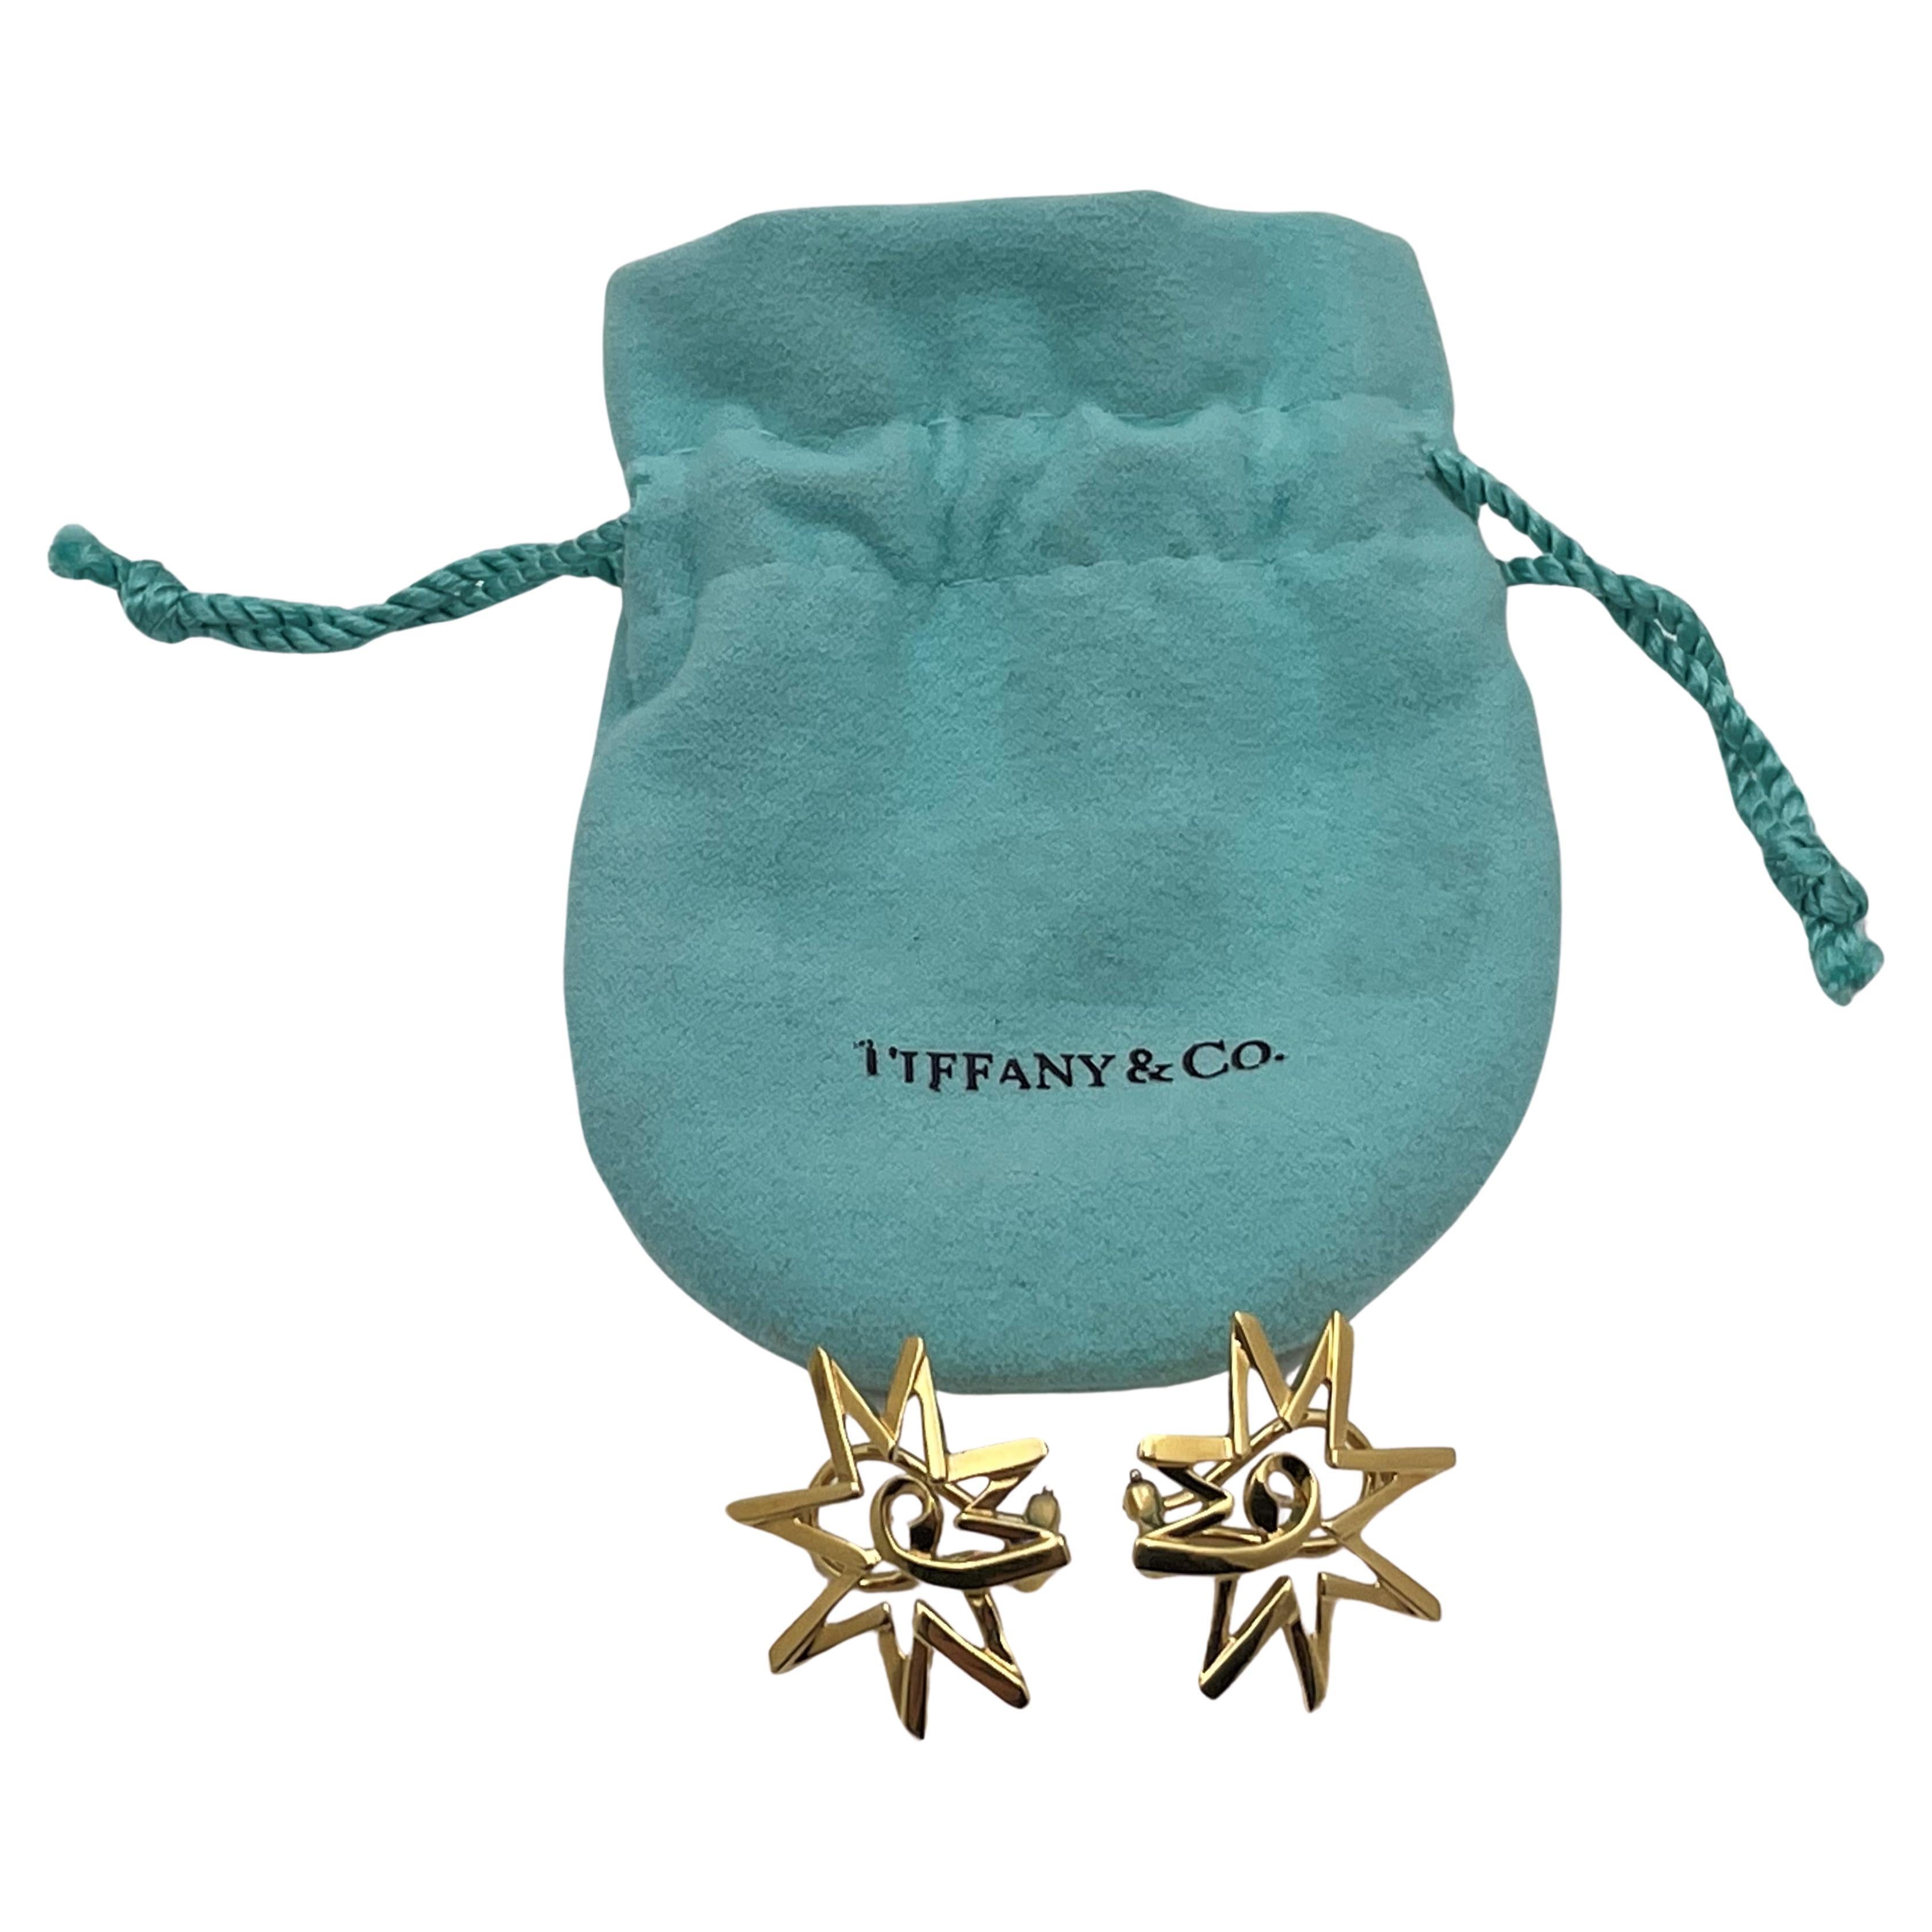 Tiffany & Co. by Paloma Picasso 18k Gold Rare Starburst Earrings For Sale